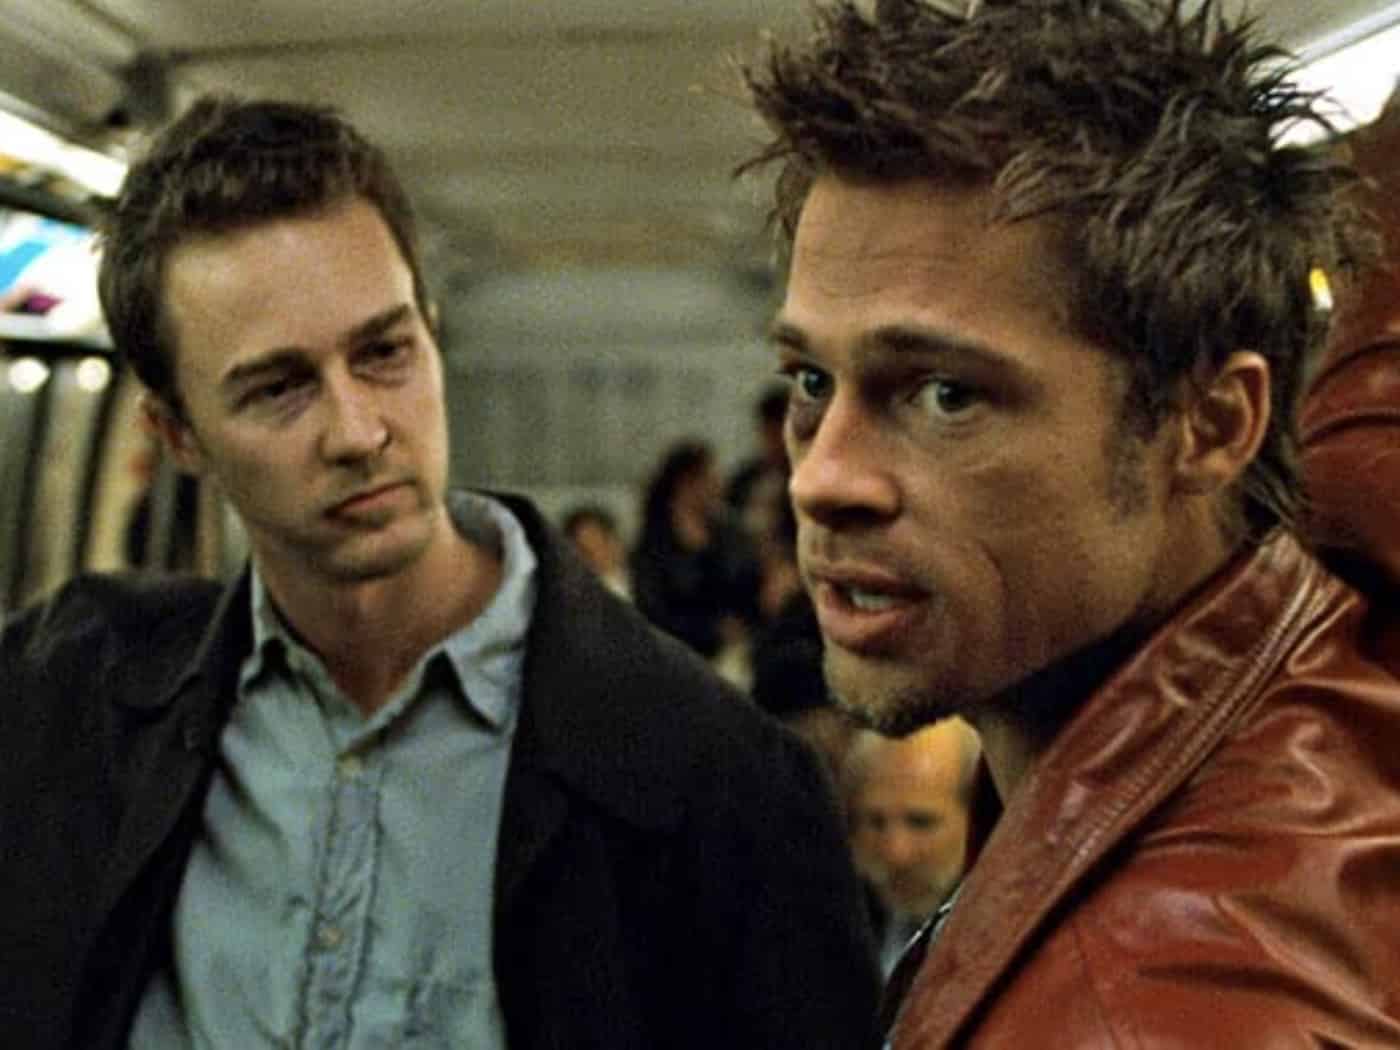 The 8 Best Flims Ever, According to Movie Reddit